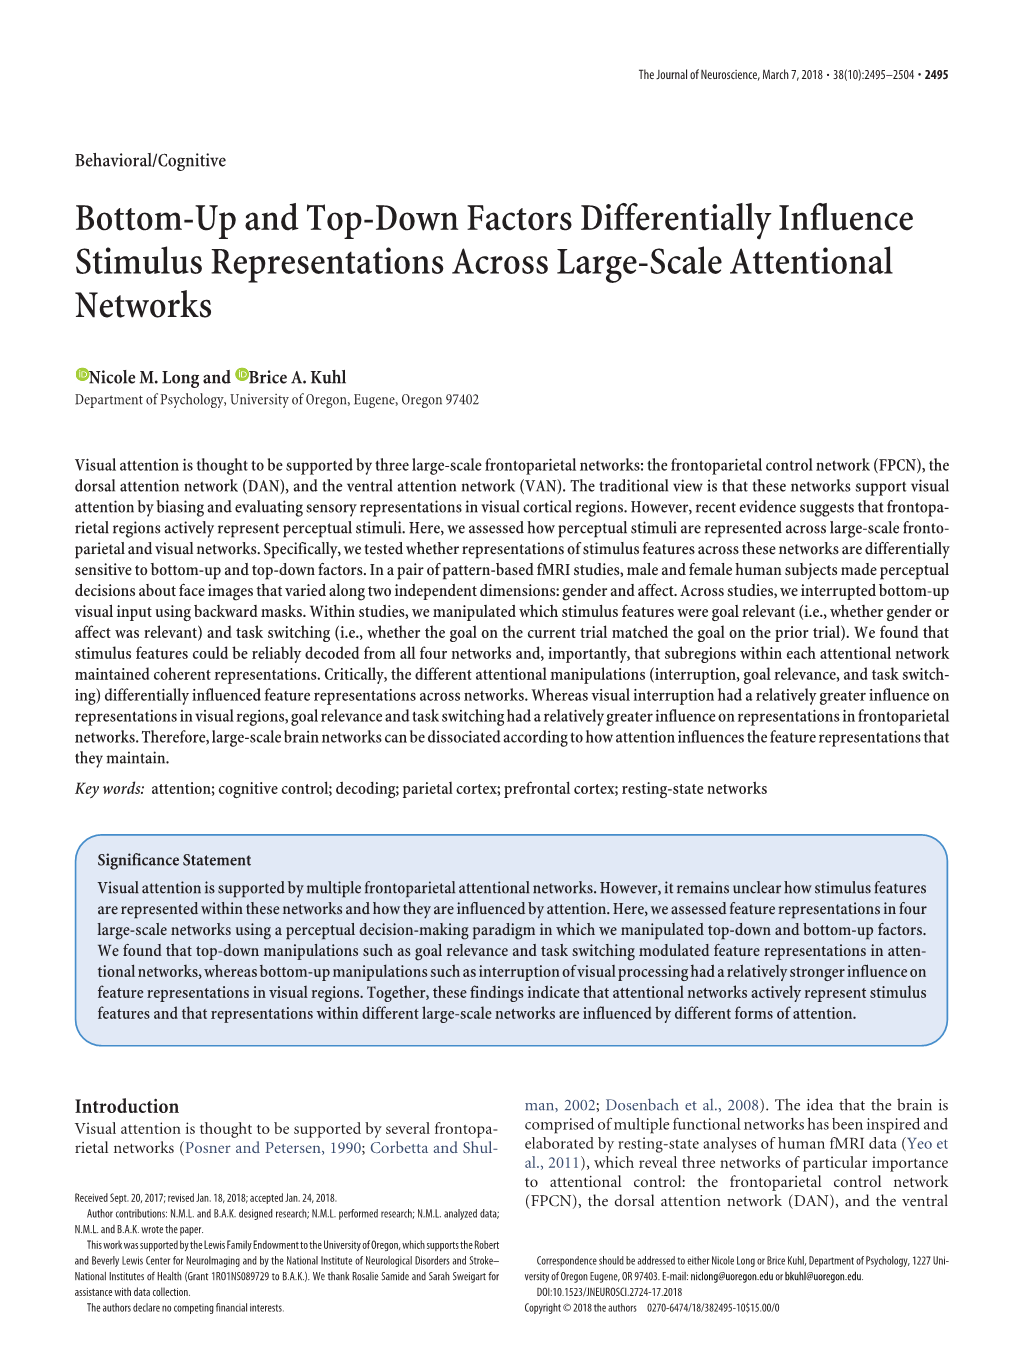 Bottom-Up and Top-Down Factors Differentially Influence Stimulus Representations Across Large-Scale Attentional Networks